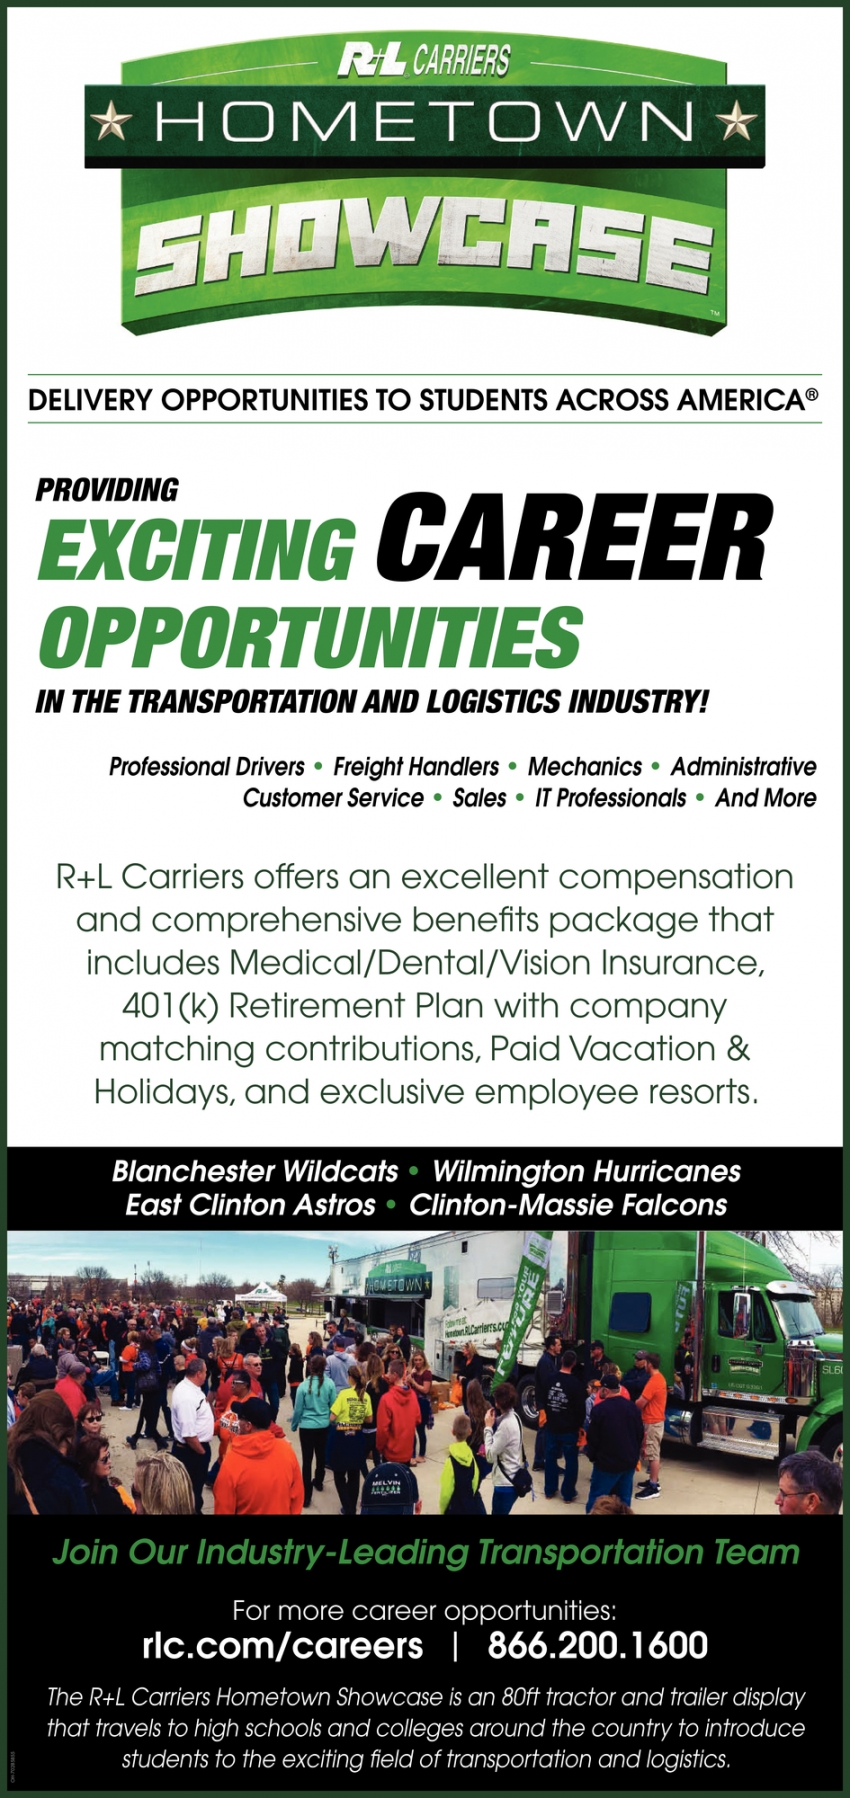 Exciting Career Opportunities